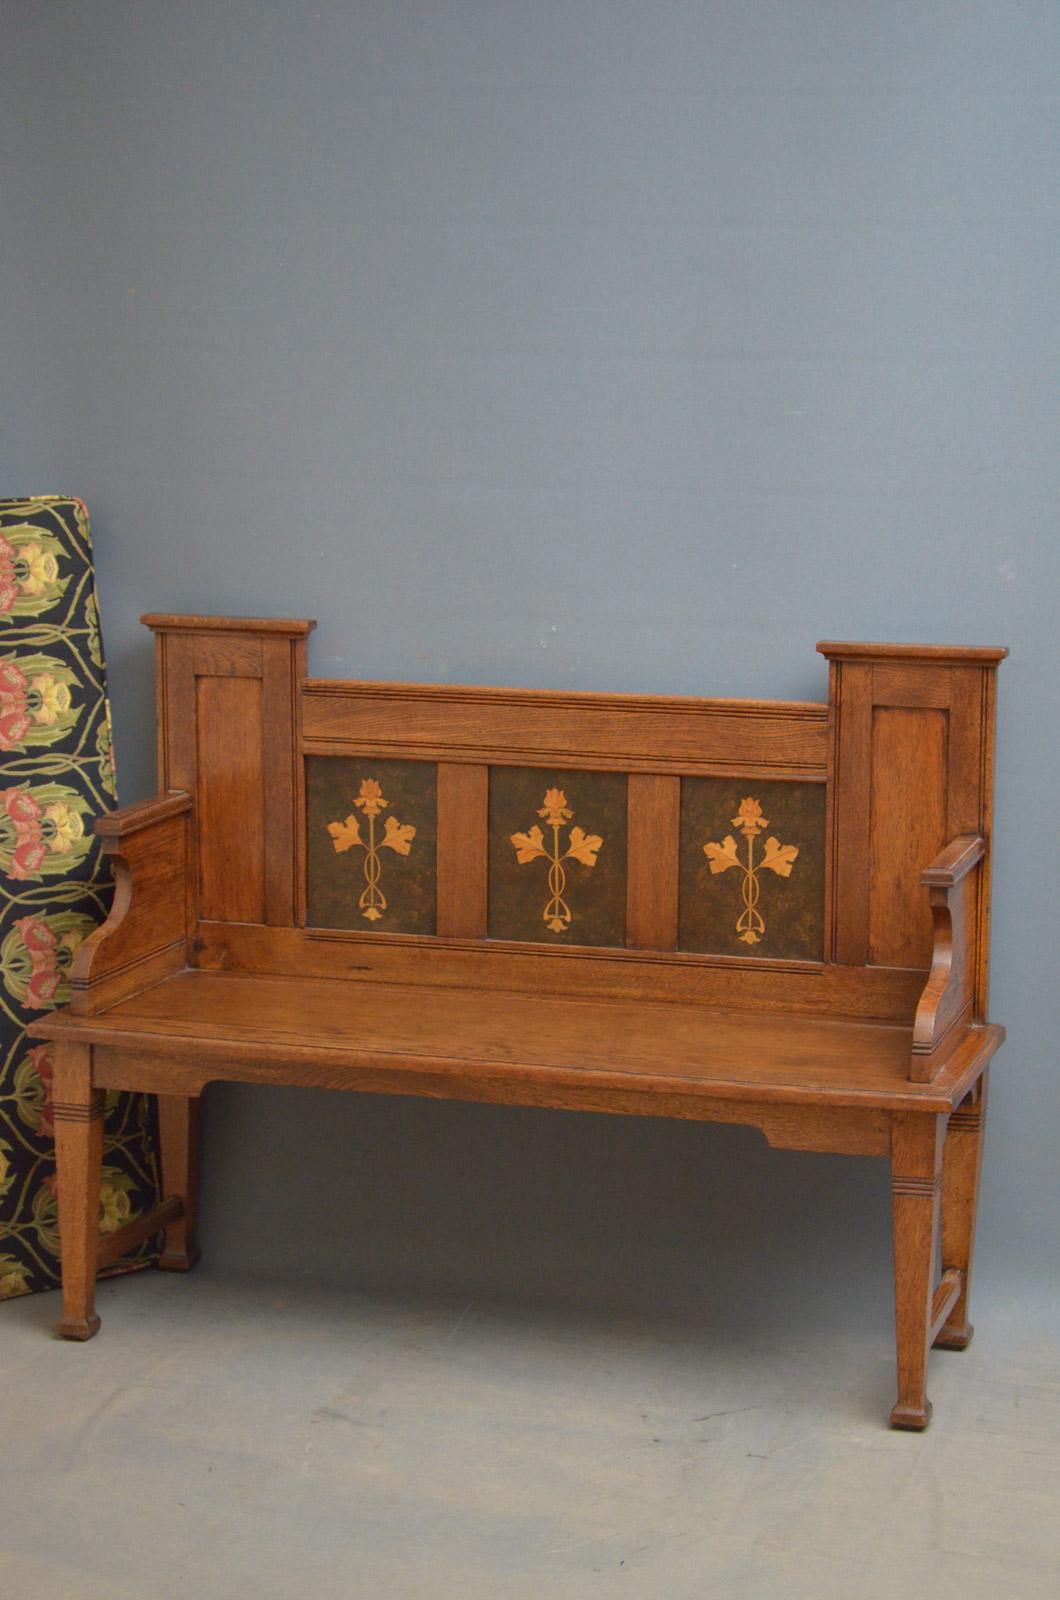 Sn4438, stylish Arts & Crafts solid oak hall seat, having 2 inlaid panels to back and generous cushion covered in William Morris style fabric, all in excellent home ready condition, circa 1890.
Measures: H 17